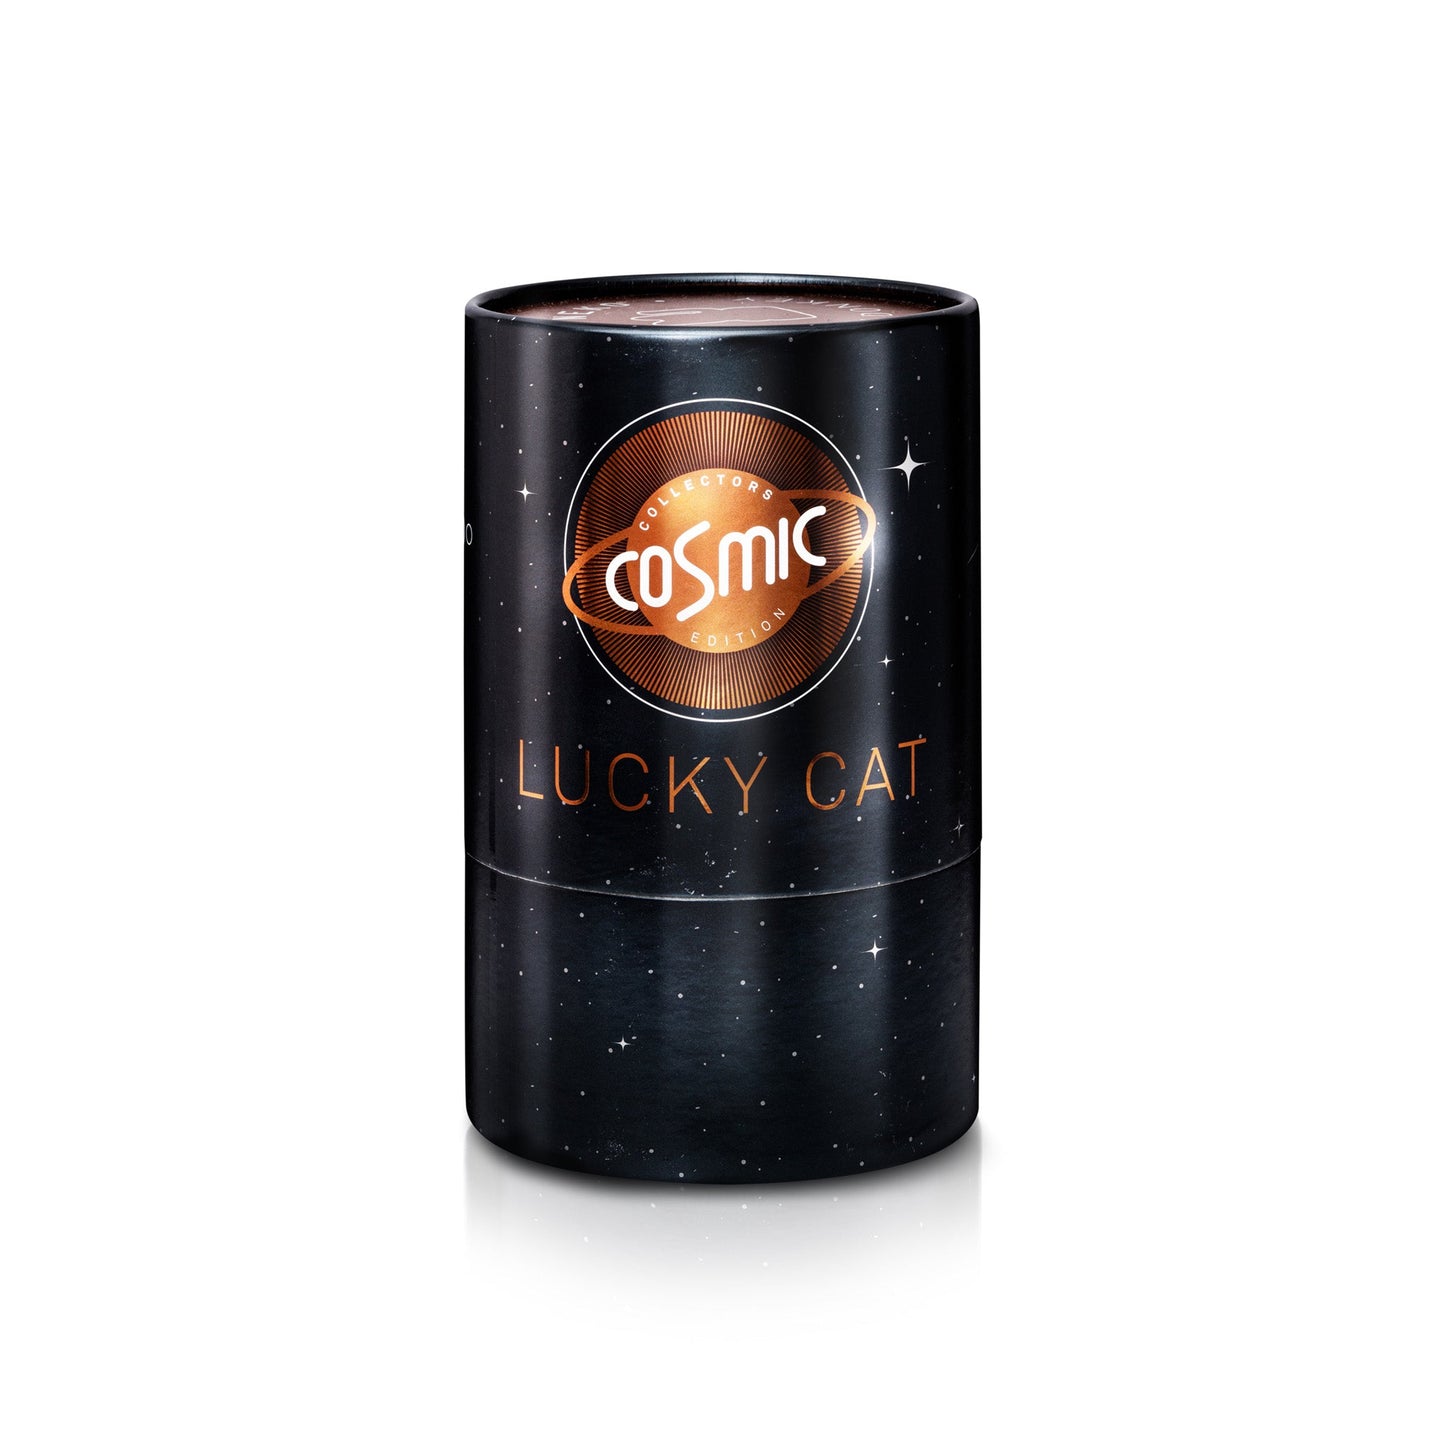 Clevary Chat Brilliant Copper - Cosmic Edition